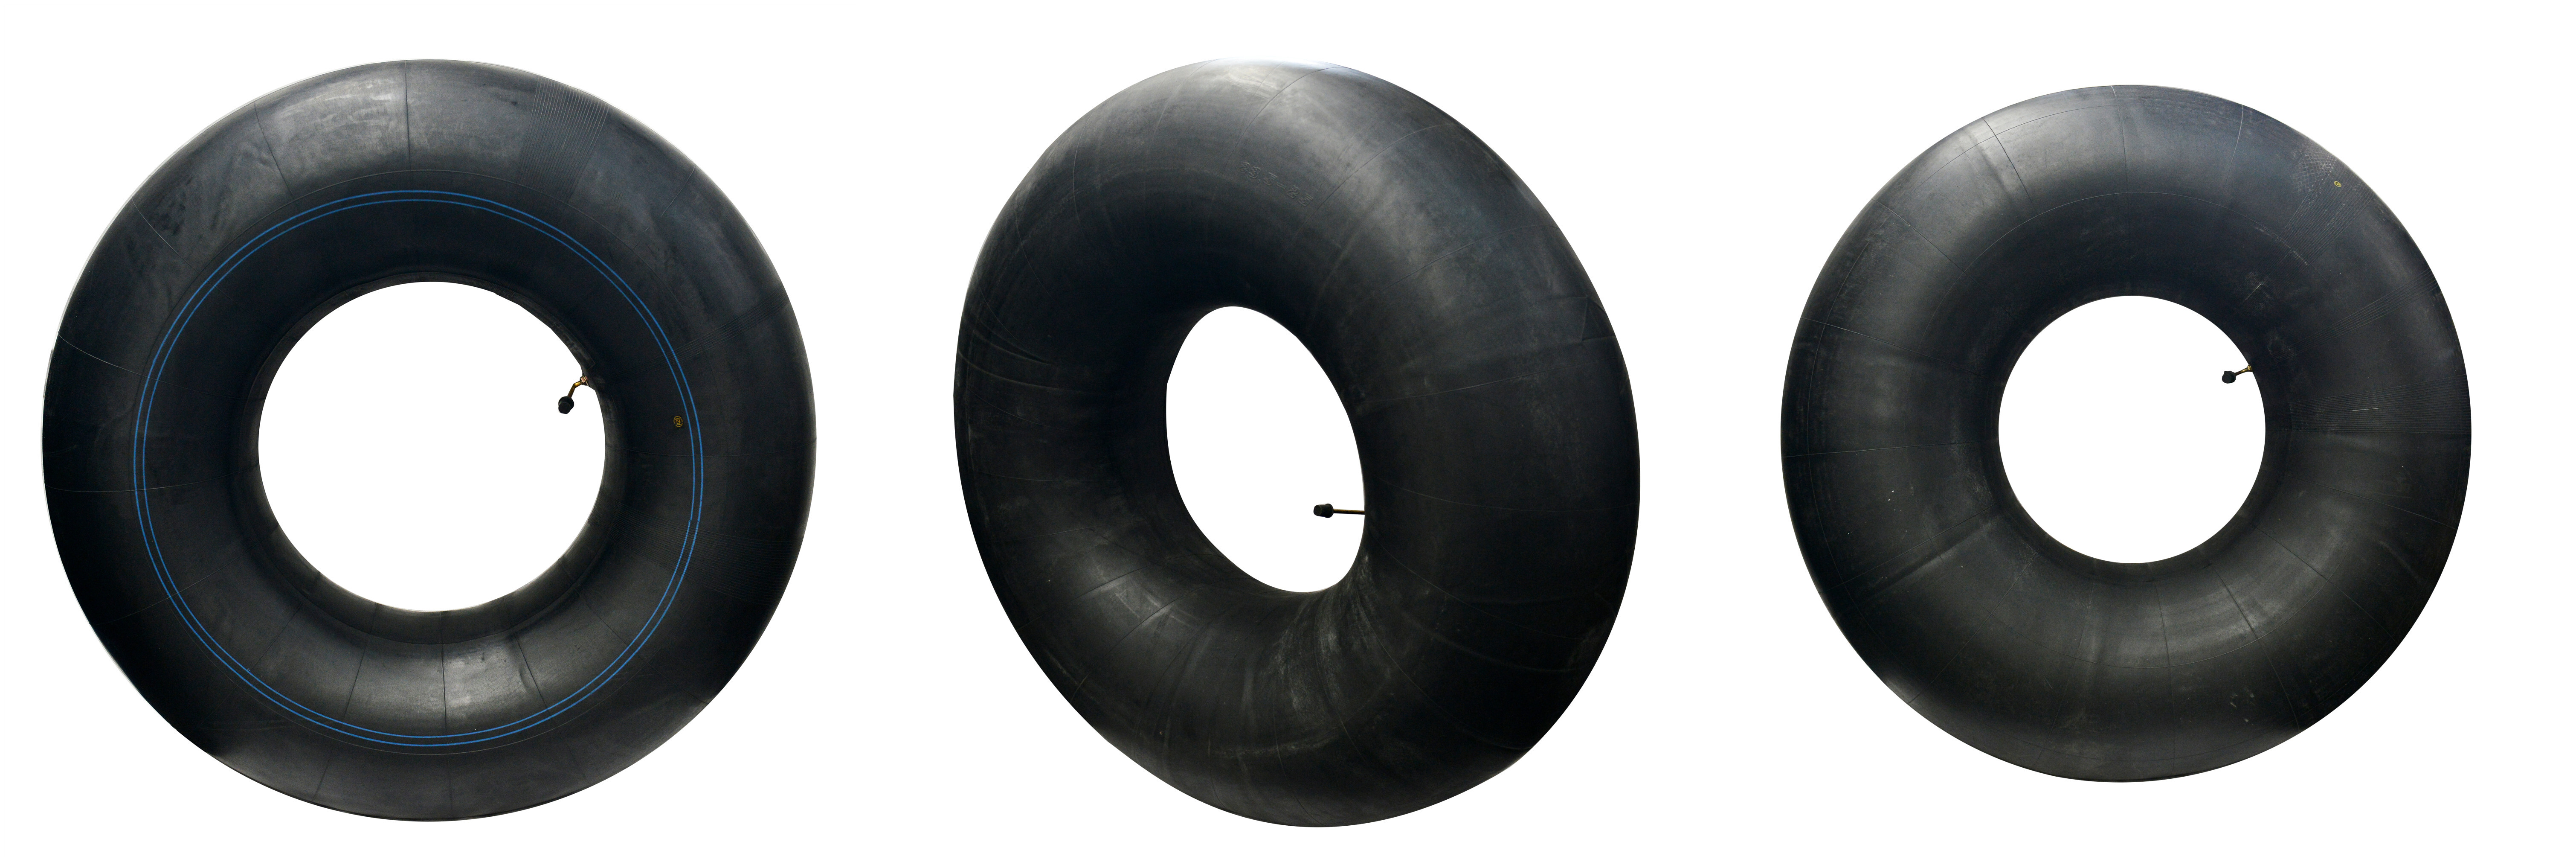 14.00R20  inner tube for truck tyres with good quality for hot sale  